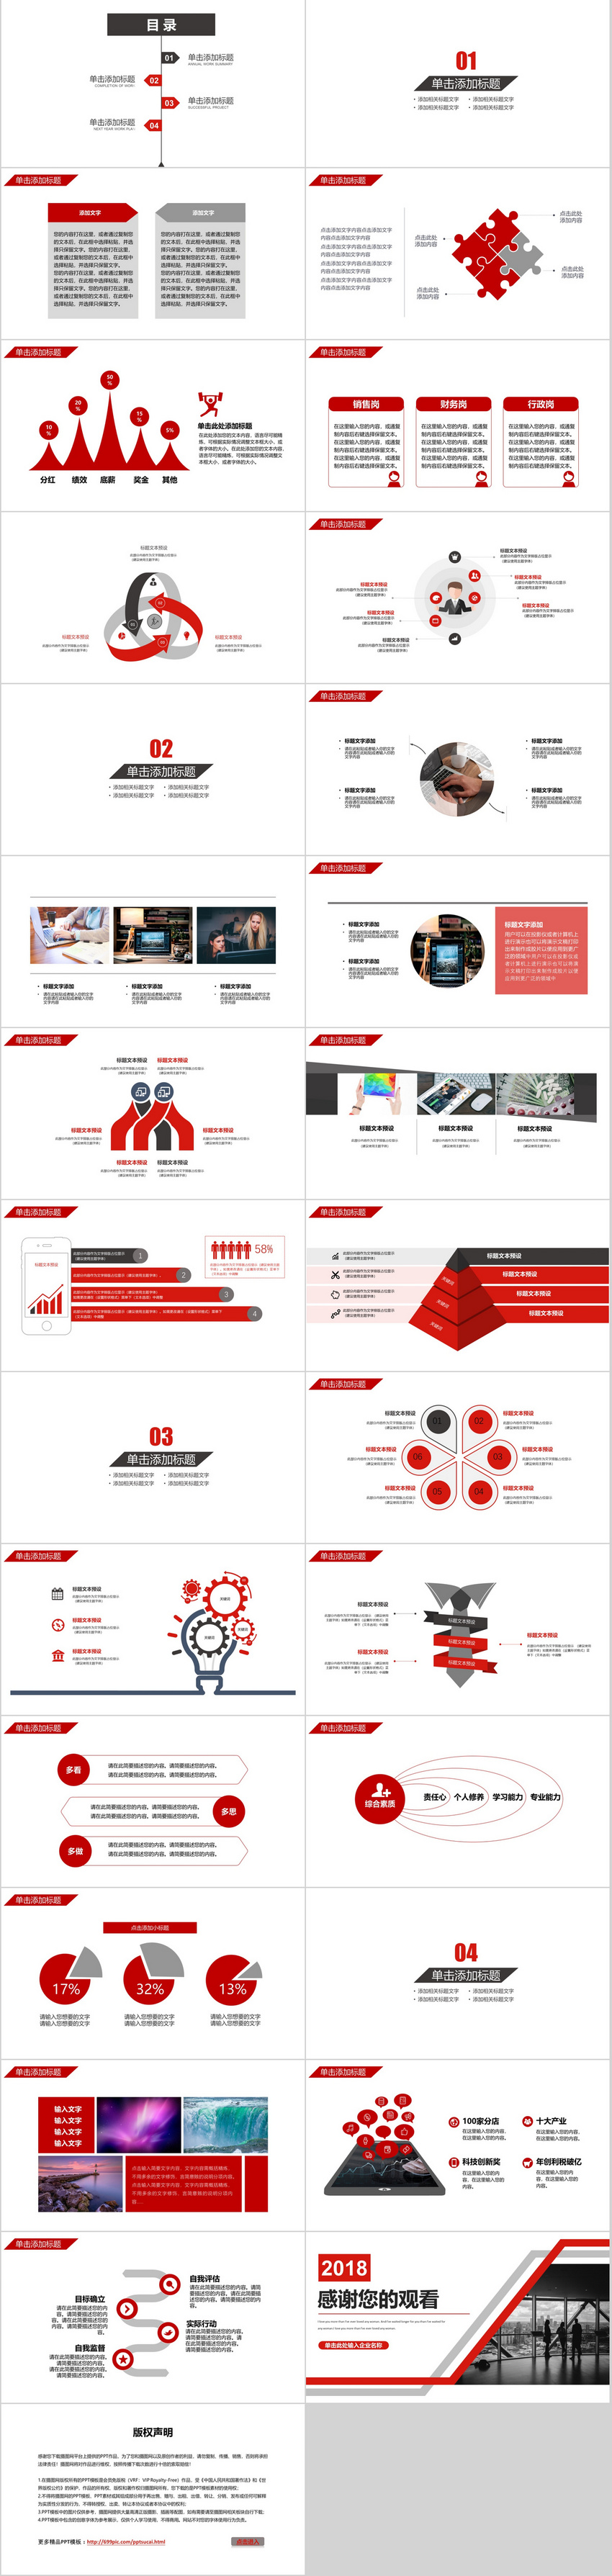 Business Enterprise Training Summary Report Ppt Template Powerpoint Templete Ppt Free Download 400141463 Lovepik Com